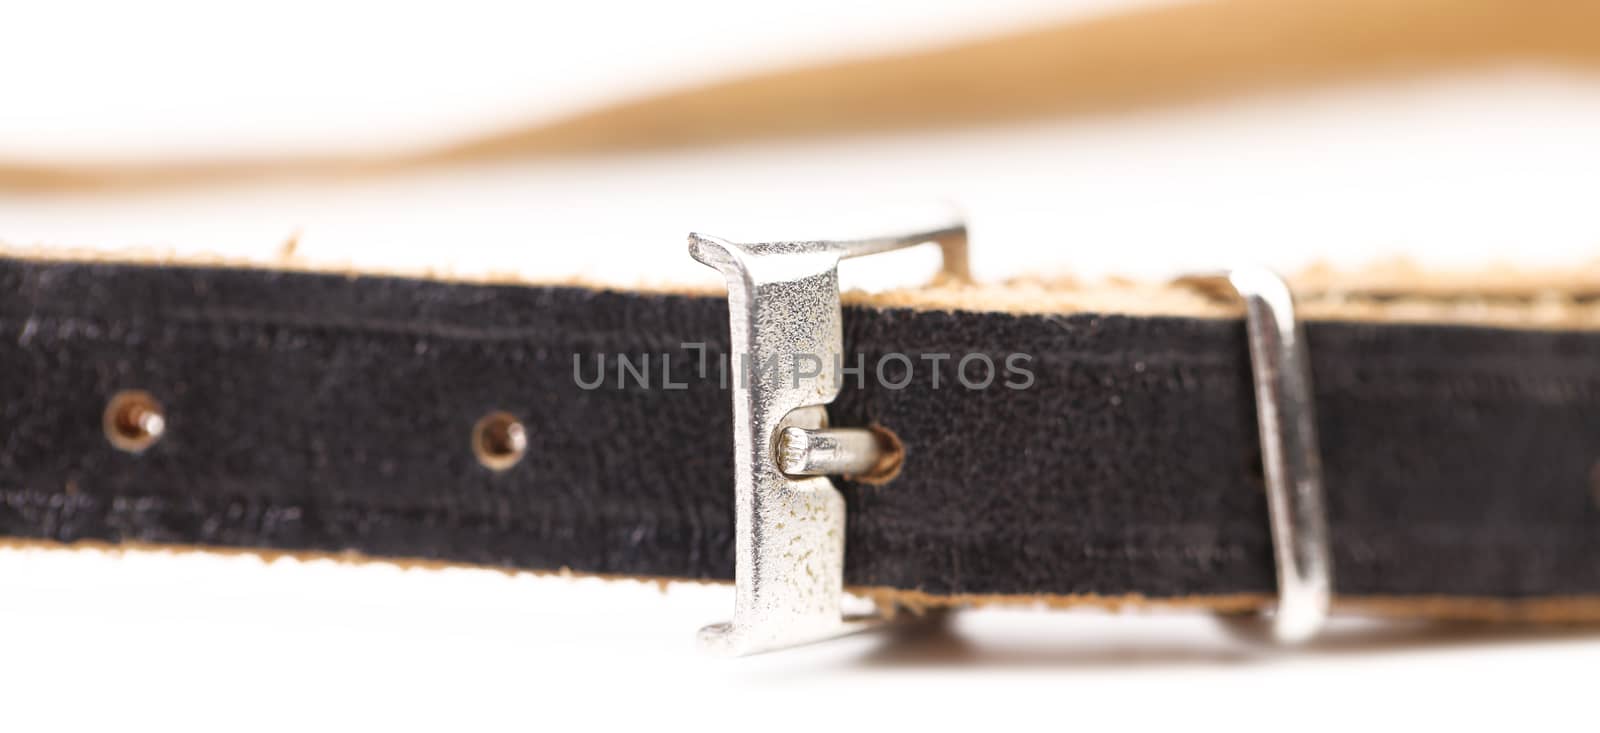 Black leather belt with a rectangular buckle by indigolotos